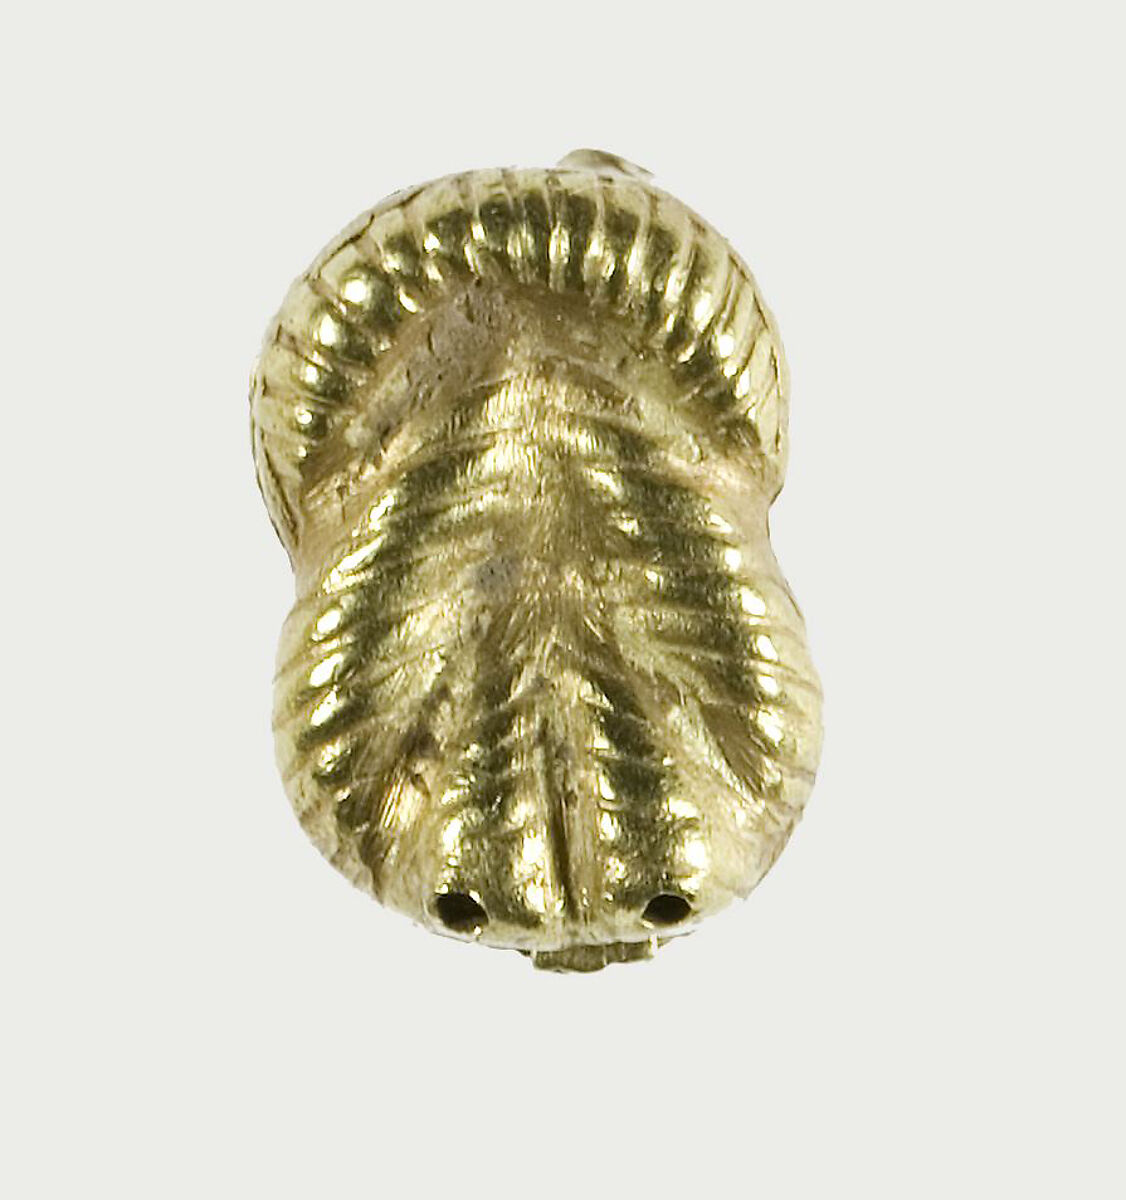 Knot Clasp of Sithathoryunet, Gold 